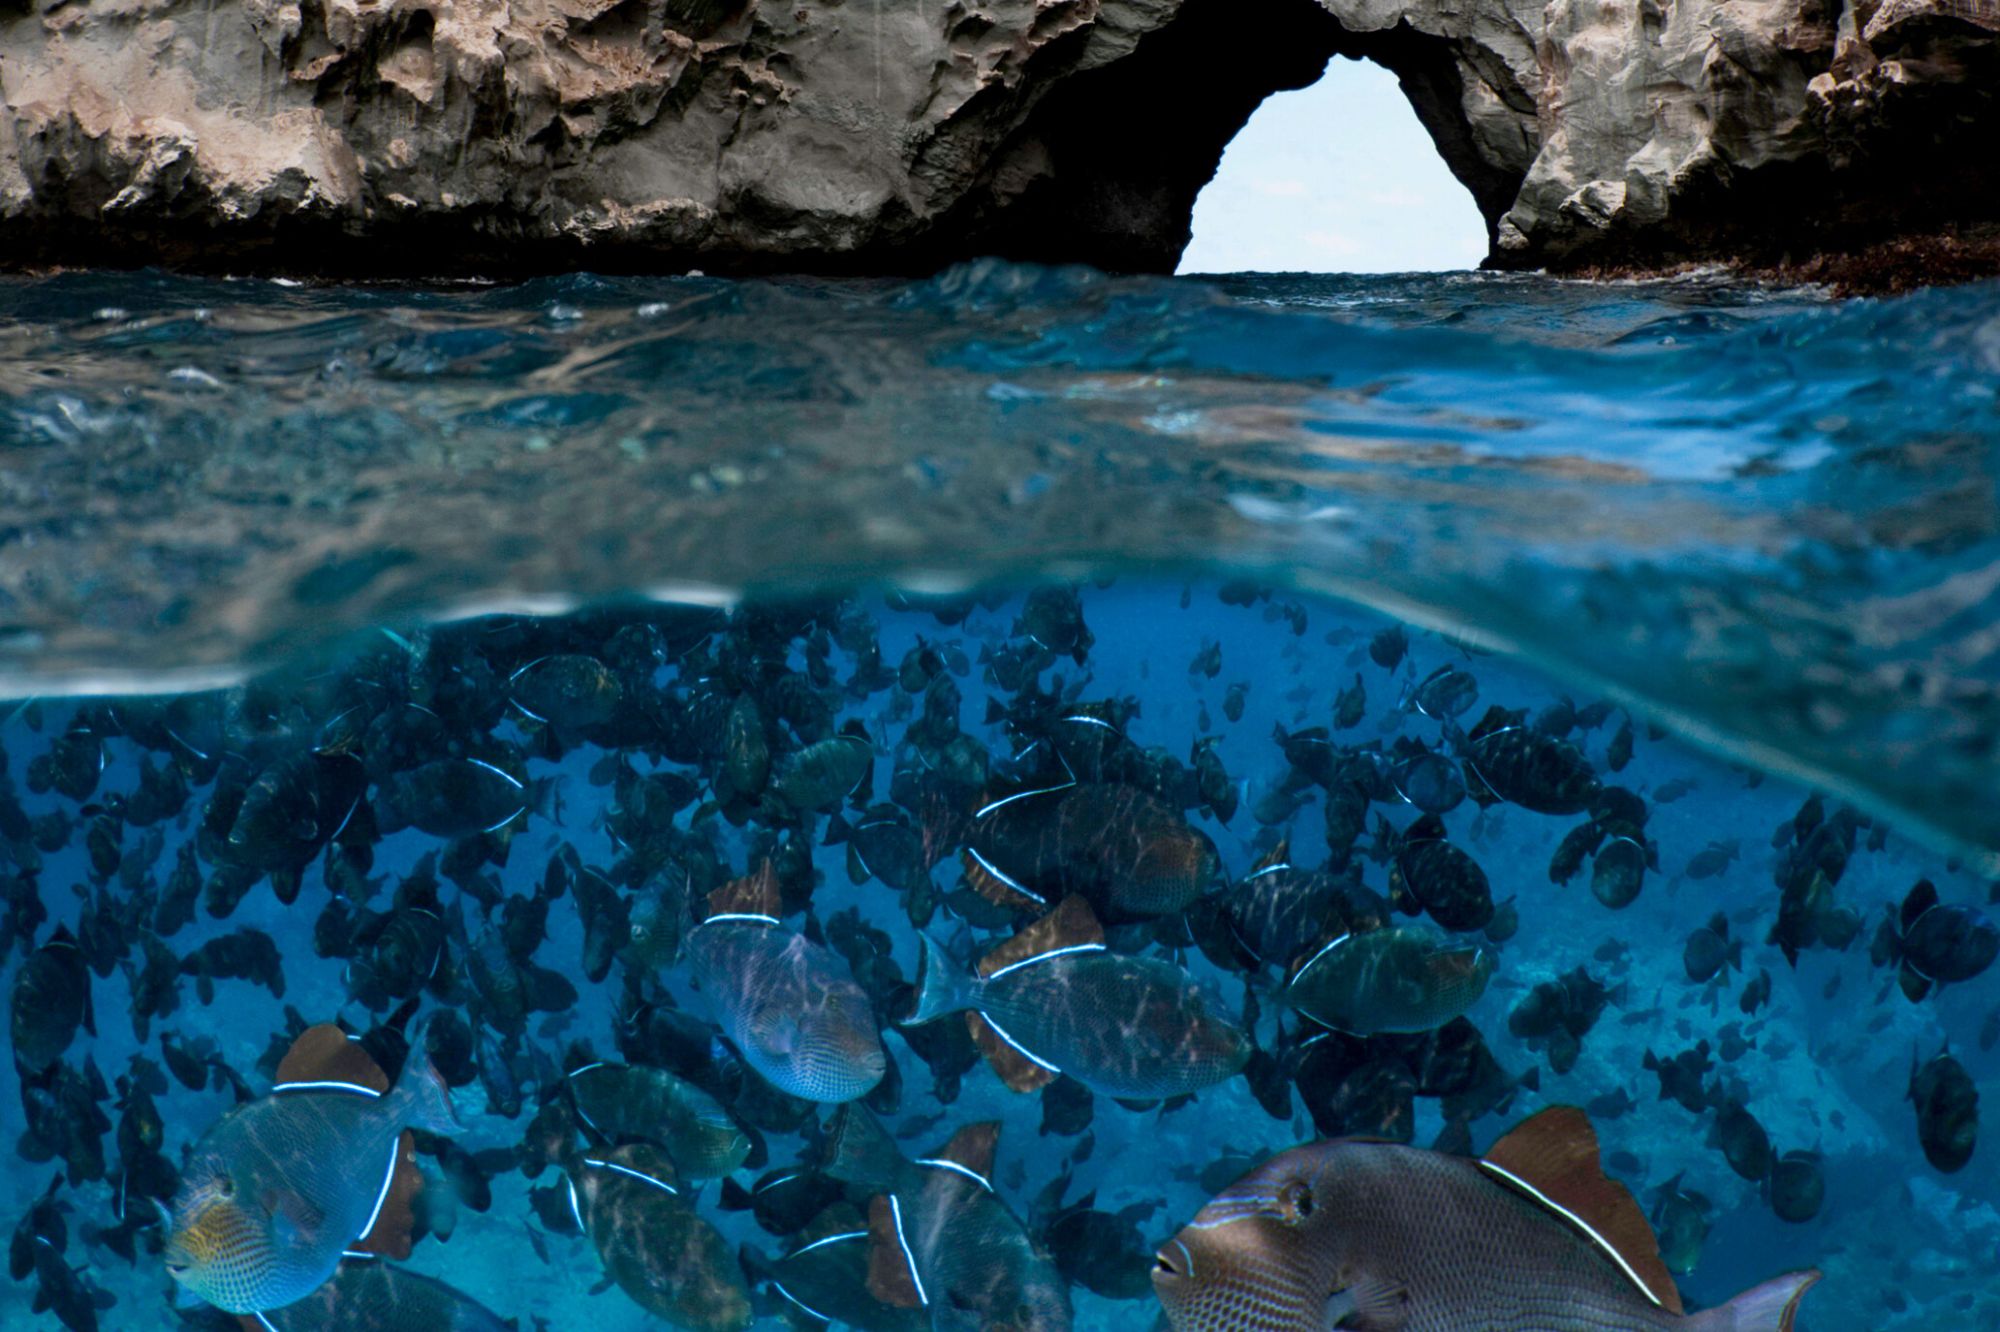 Above: Black triggerfish swimming around Boatswain Bird Island near Ascension Island. The seas around the remote Ascension Island, situated in the equatorial Atlantic Ocean, have been protected from fishing and deep-sea mining since 2019 and it is the 8th largest marine protected area (MPA) in the ocean. Despite efforts to safeguard this marine area, computer models forecast a worrying future for the area if the rate of climate change continues, even in low emission scenarios.      